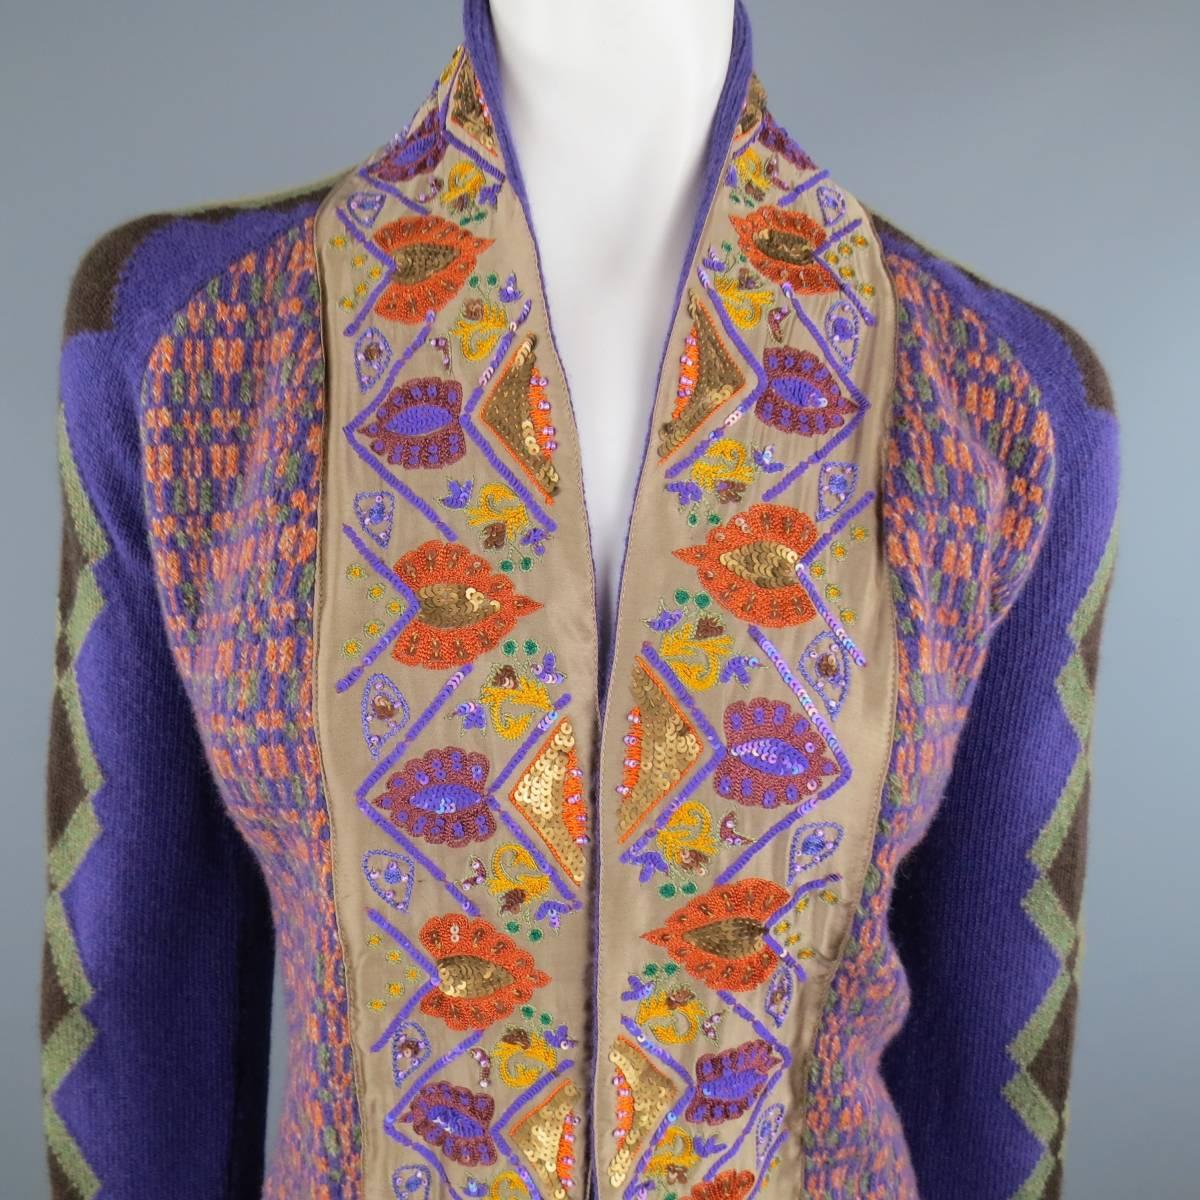 Open front ETRO cardigan features a purple, orange, and green pattern knit body, beige satin trim collar with sequin embroidery, and argyle pattern sleeves. Made in Italy.
 
Good Pre-Owned Condition.
Marked: 46
 
Measurements:
 
Shoulder: 17